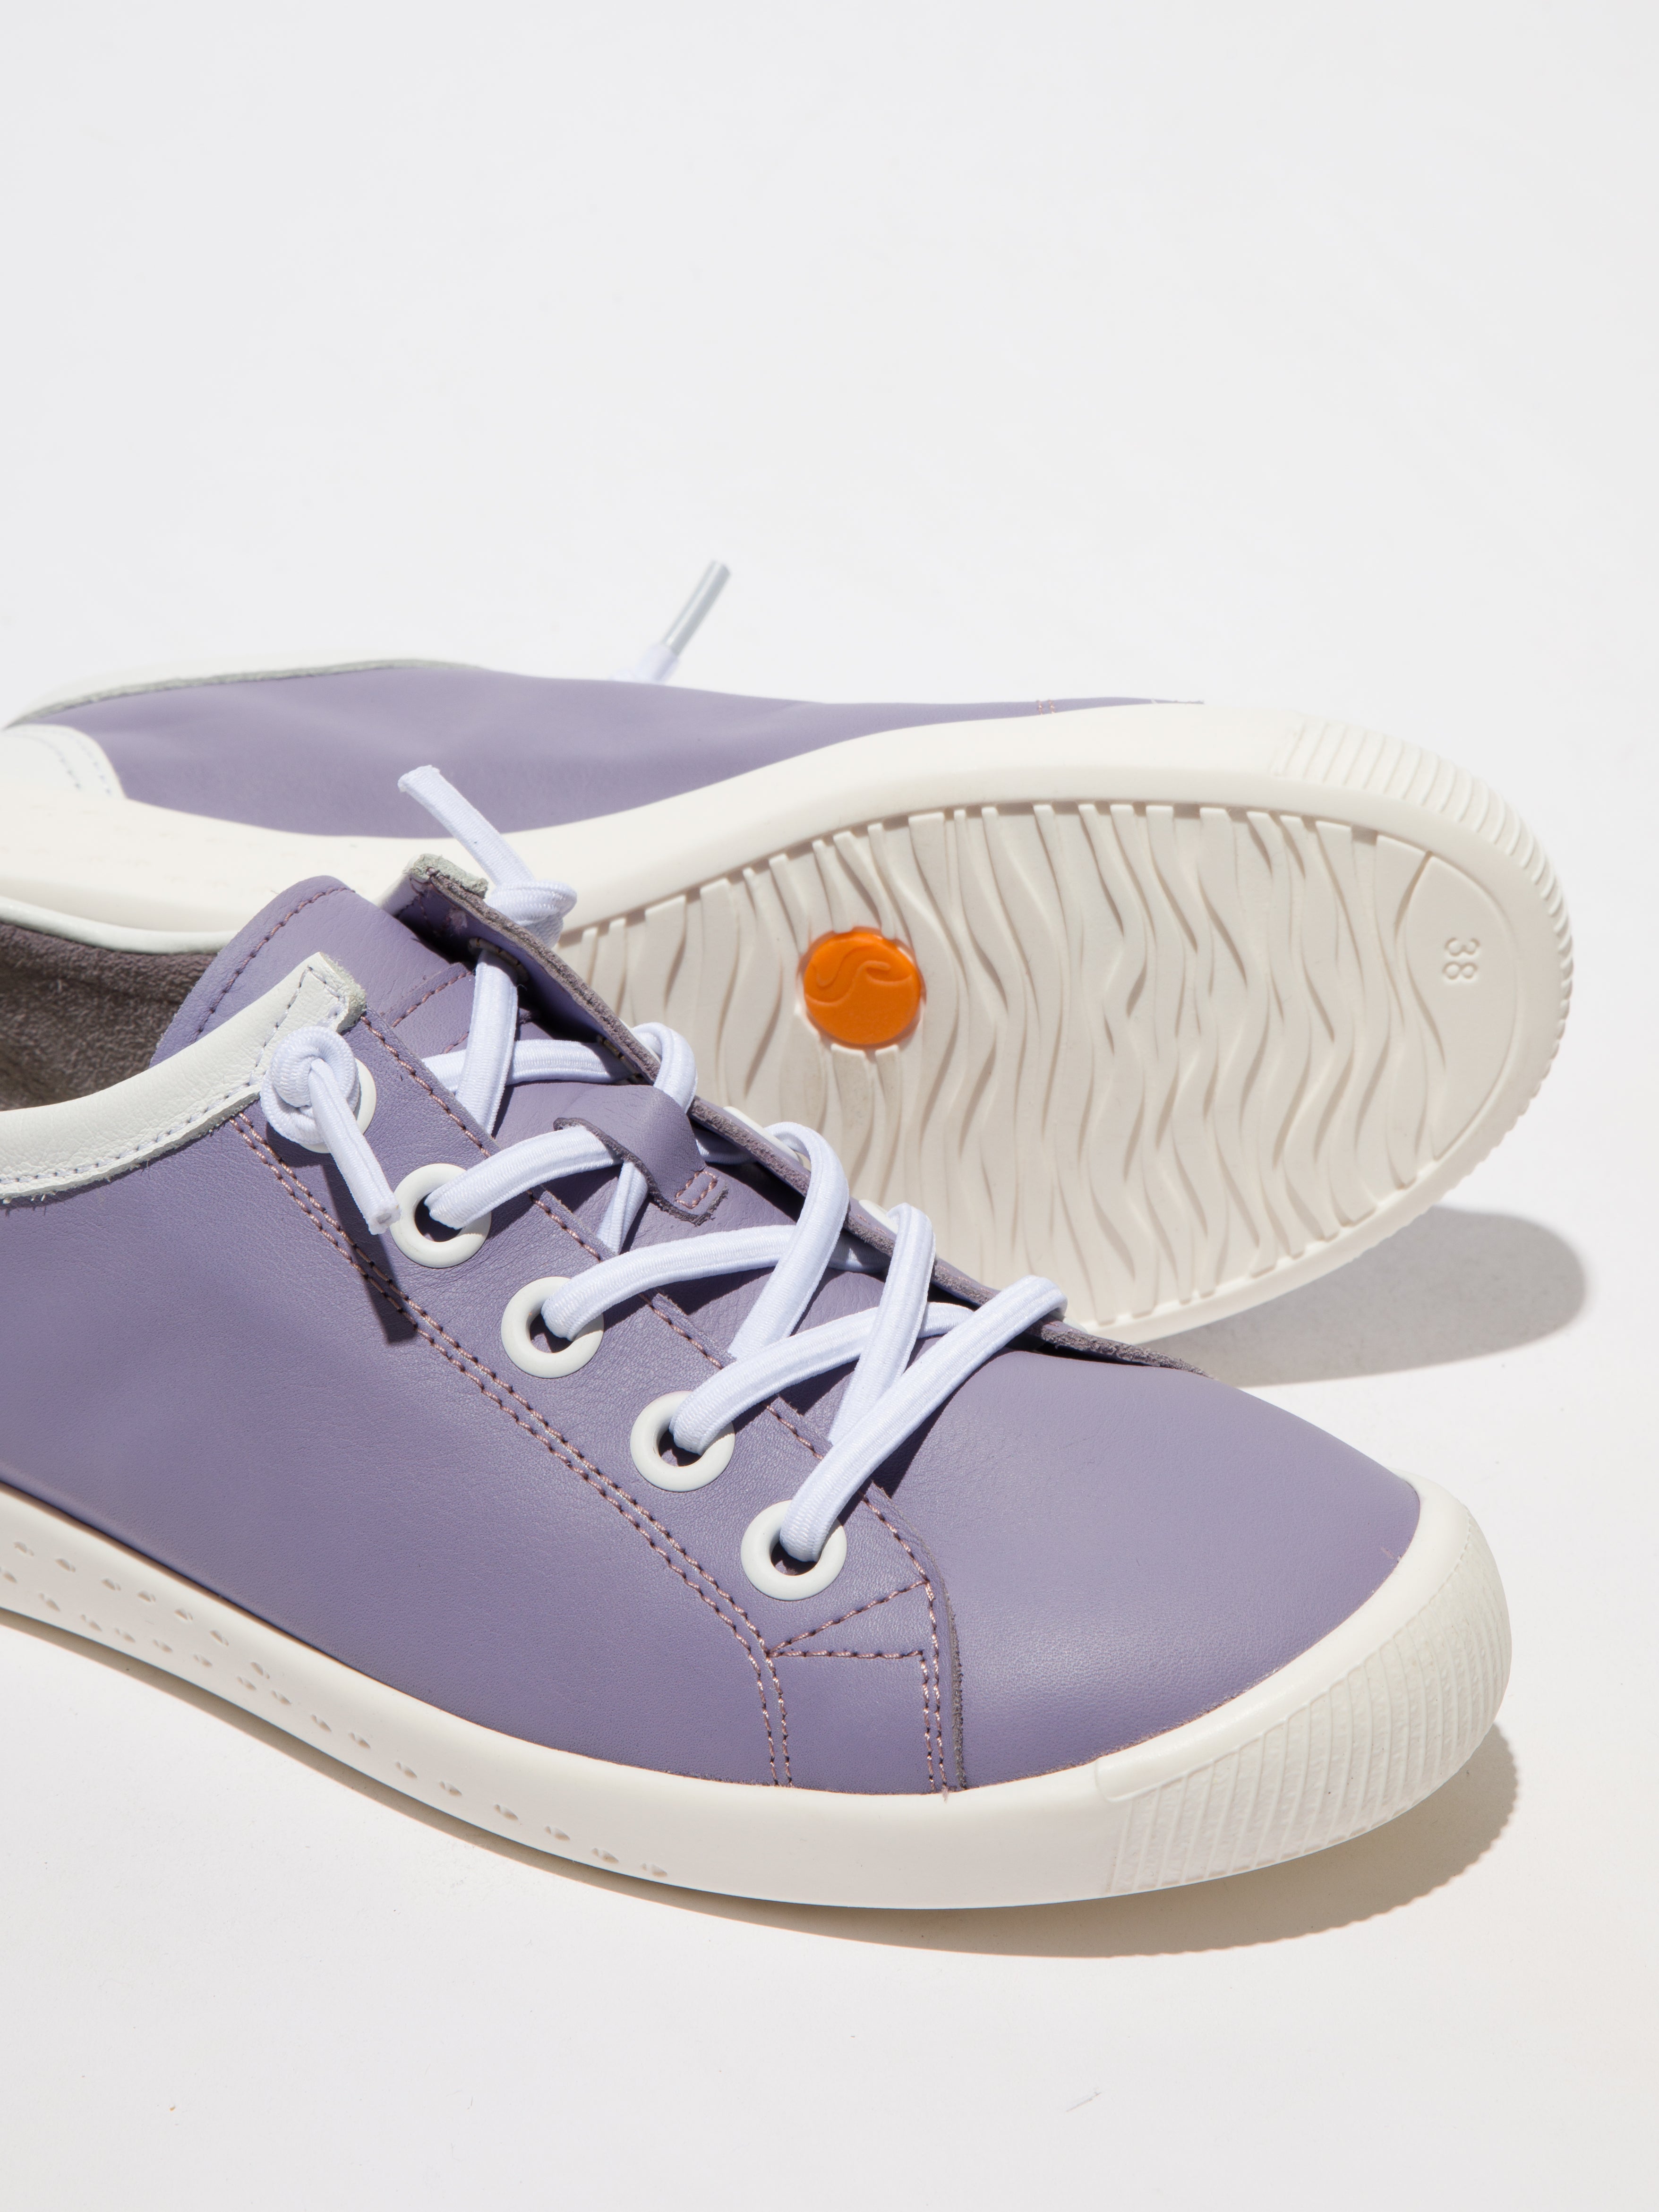 Softinos Isla II 557 Ladies Violet And White Leather Elasticated Shoes